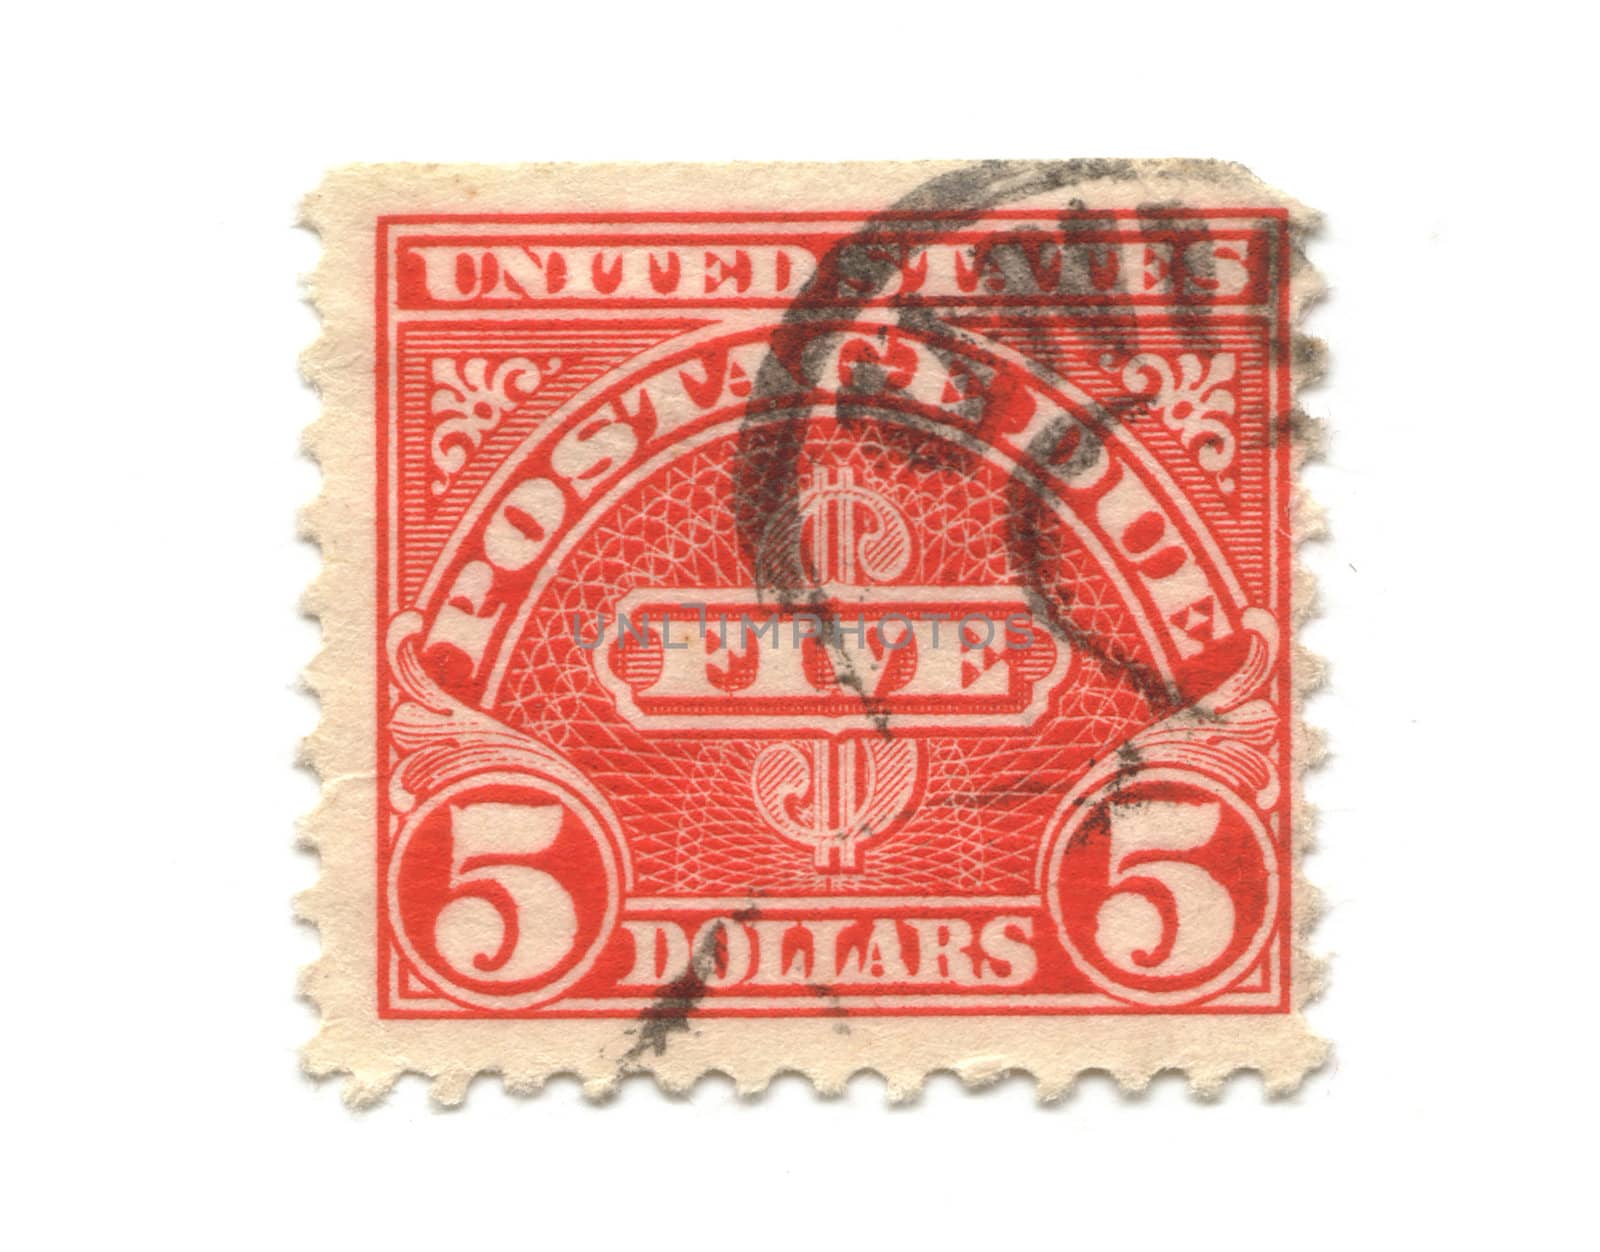 Old postage stamps from USA 5 Dollars  by fambros